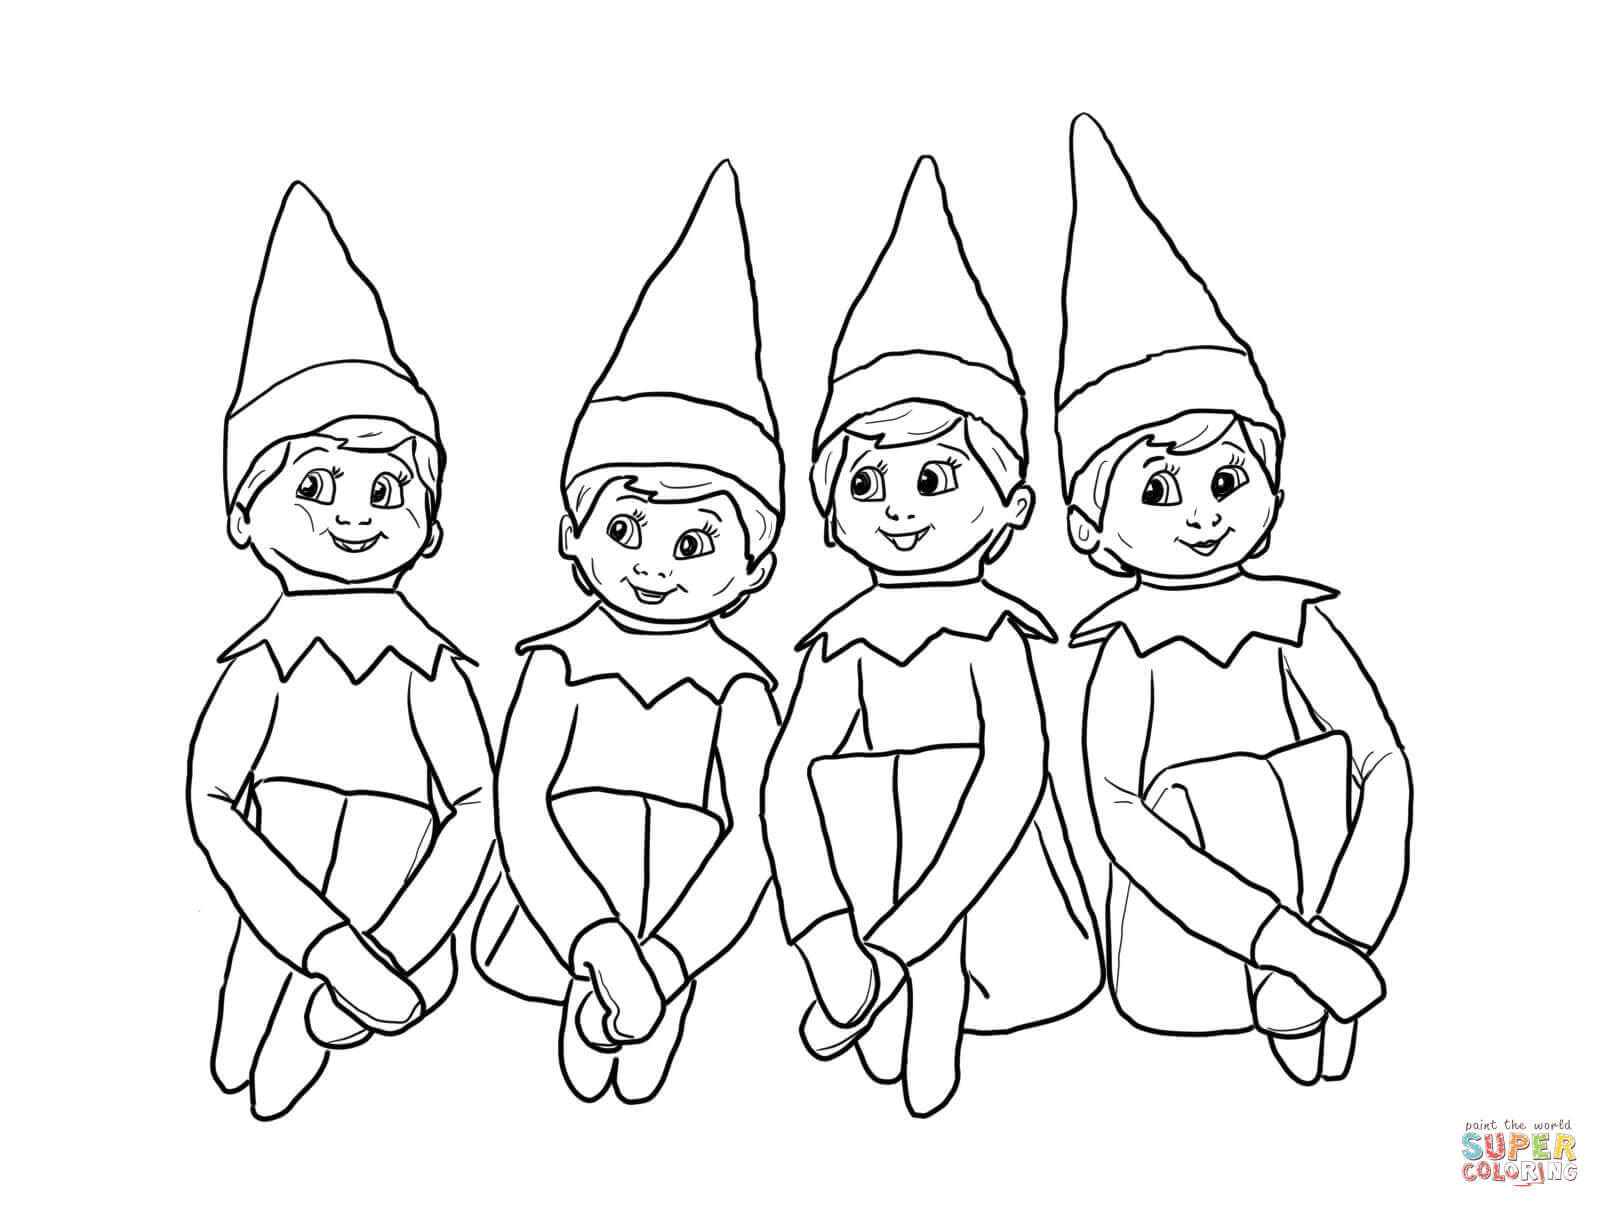 santa and elf coloring pages | elf on the shelf coloring pages | elf printable coloring pages